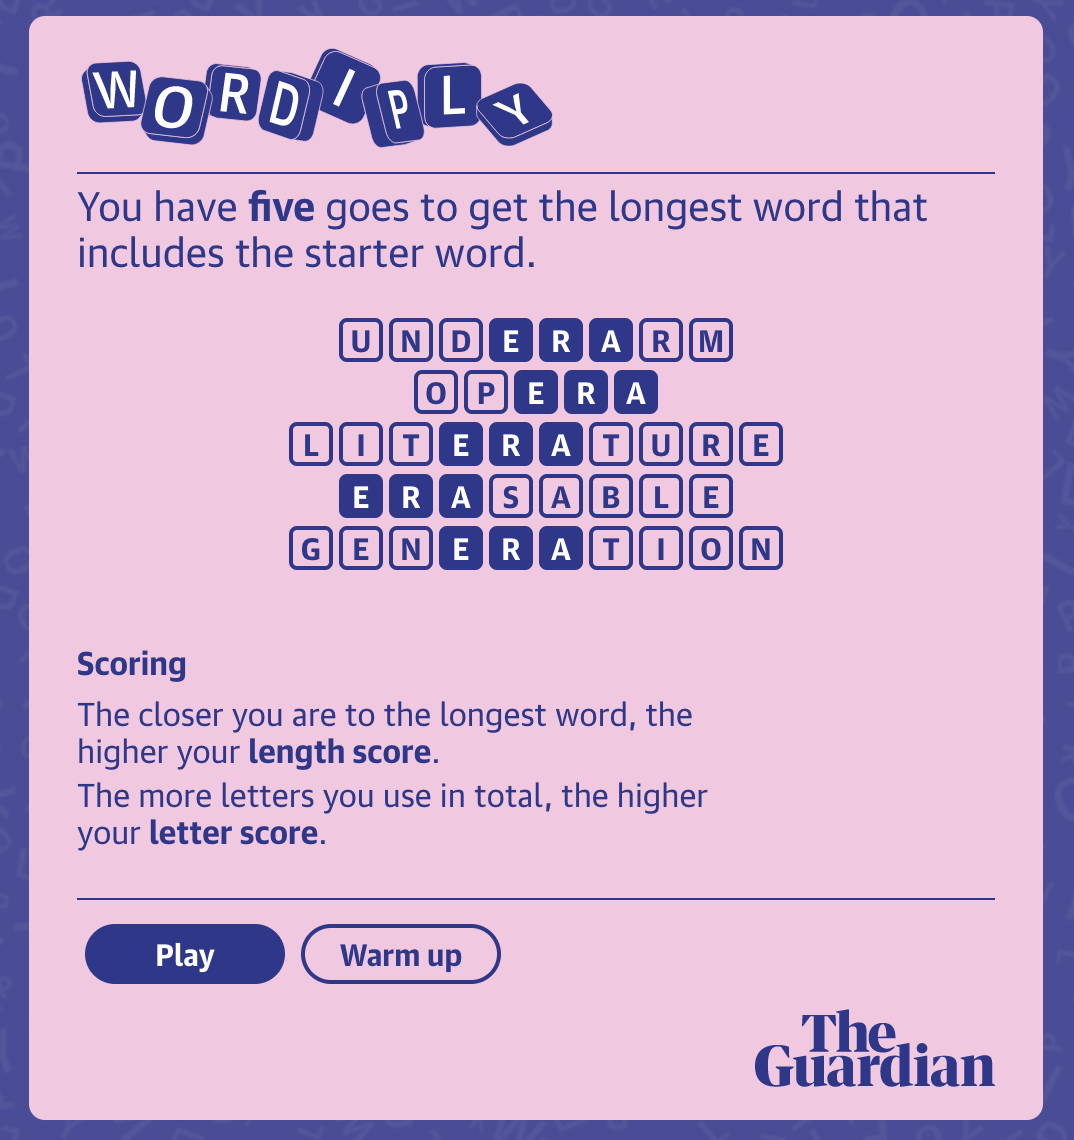 Enjoy Wordle? Try These Other Puzzle Games Next - CNET